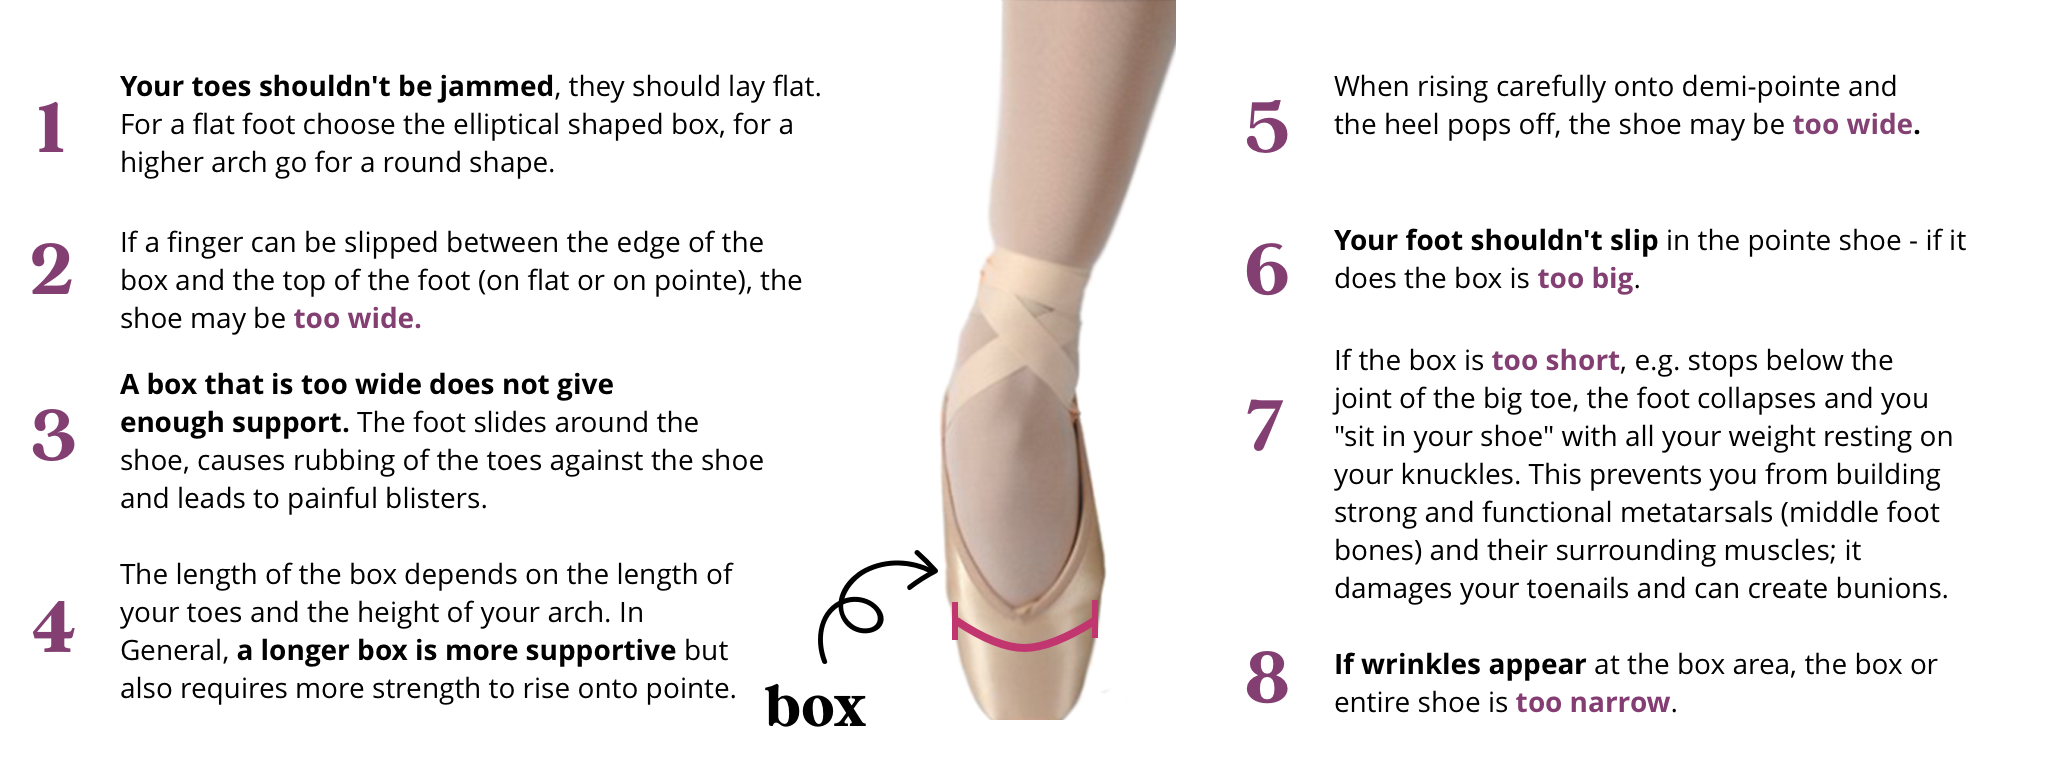 How to choose your pointe shoes? - Flamencista